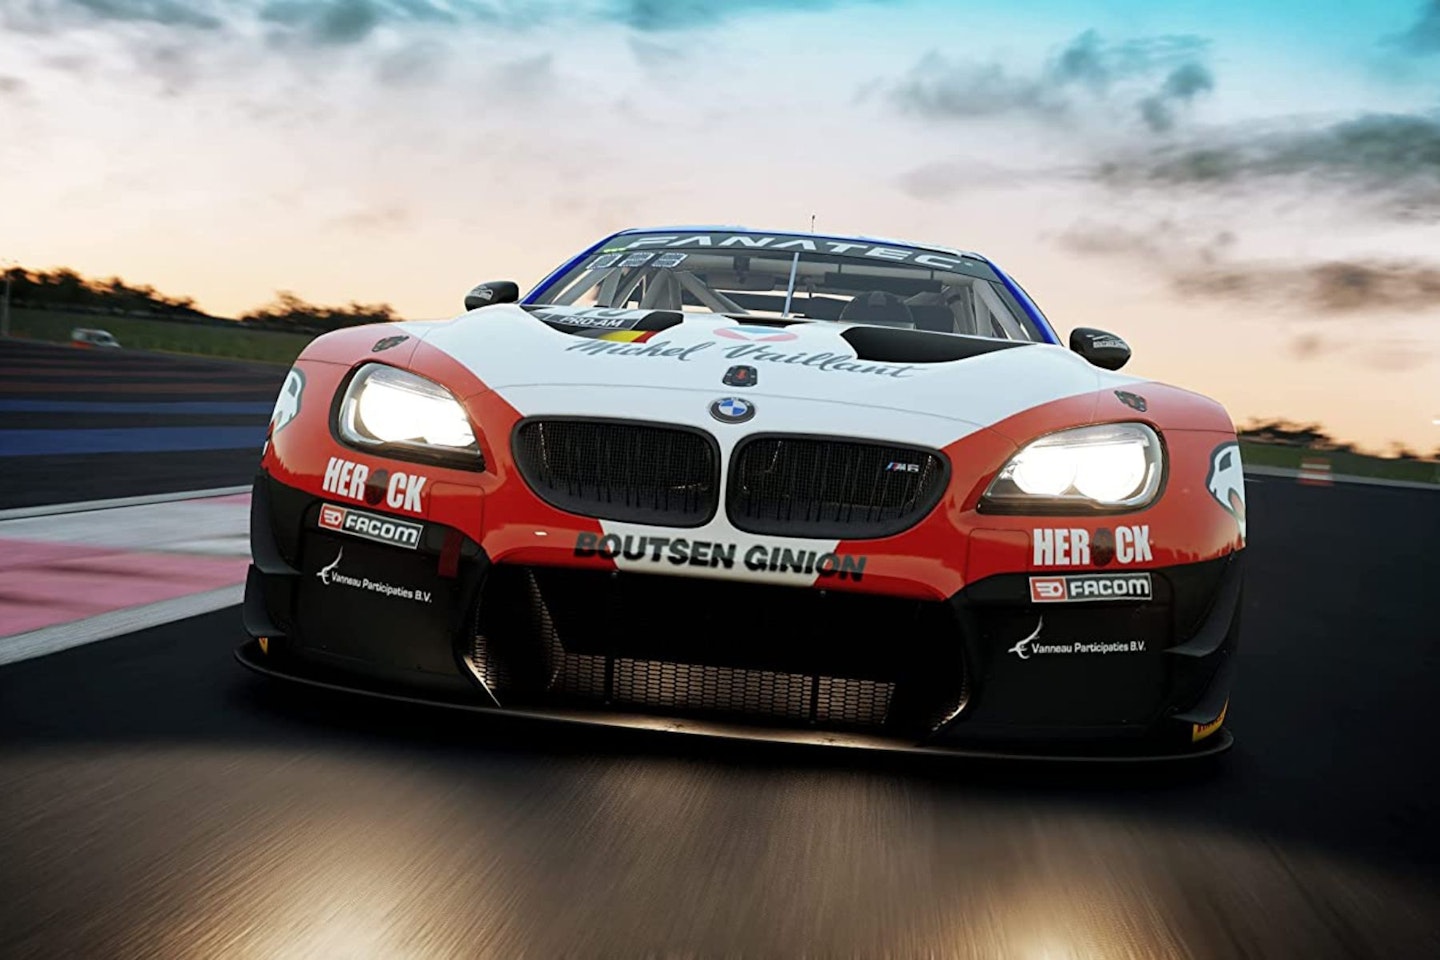 Project Cars 3 is turning its back on racing sim tradition